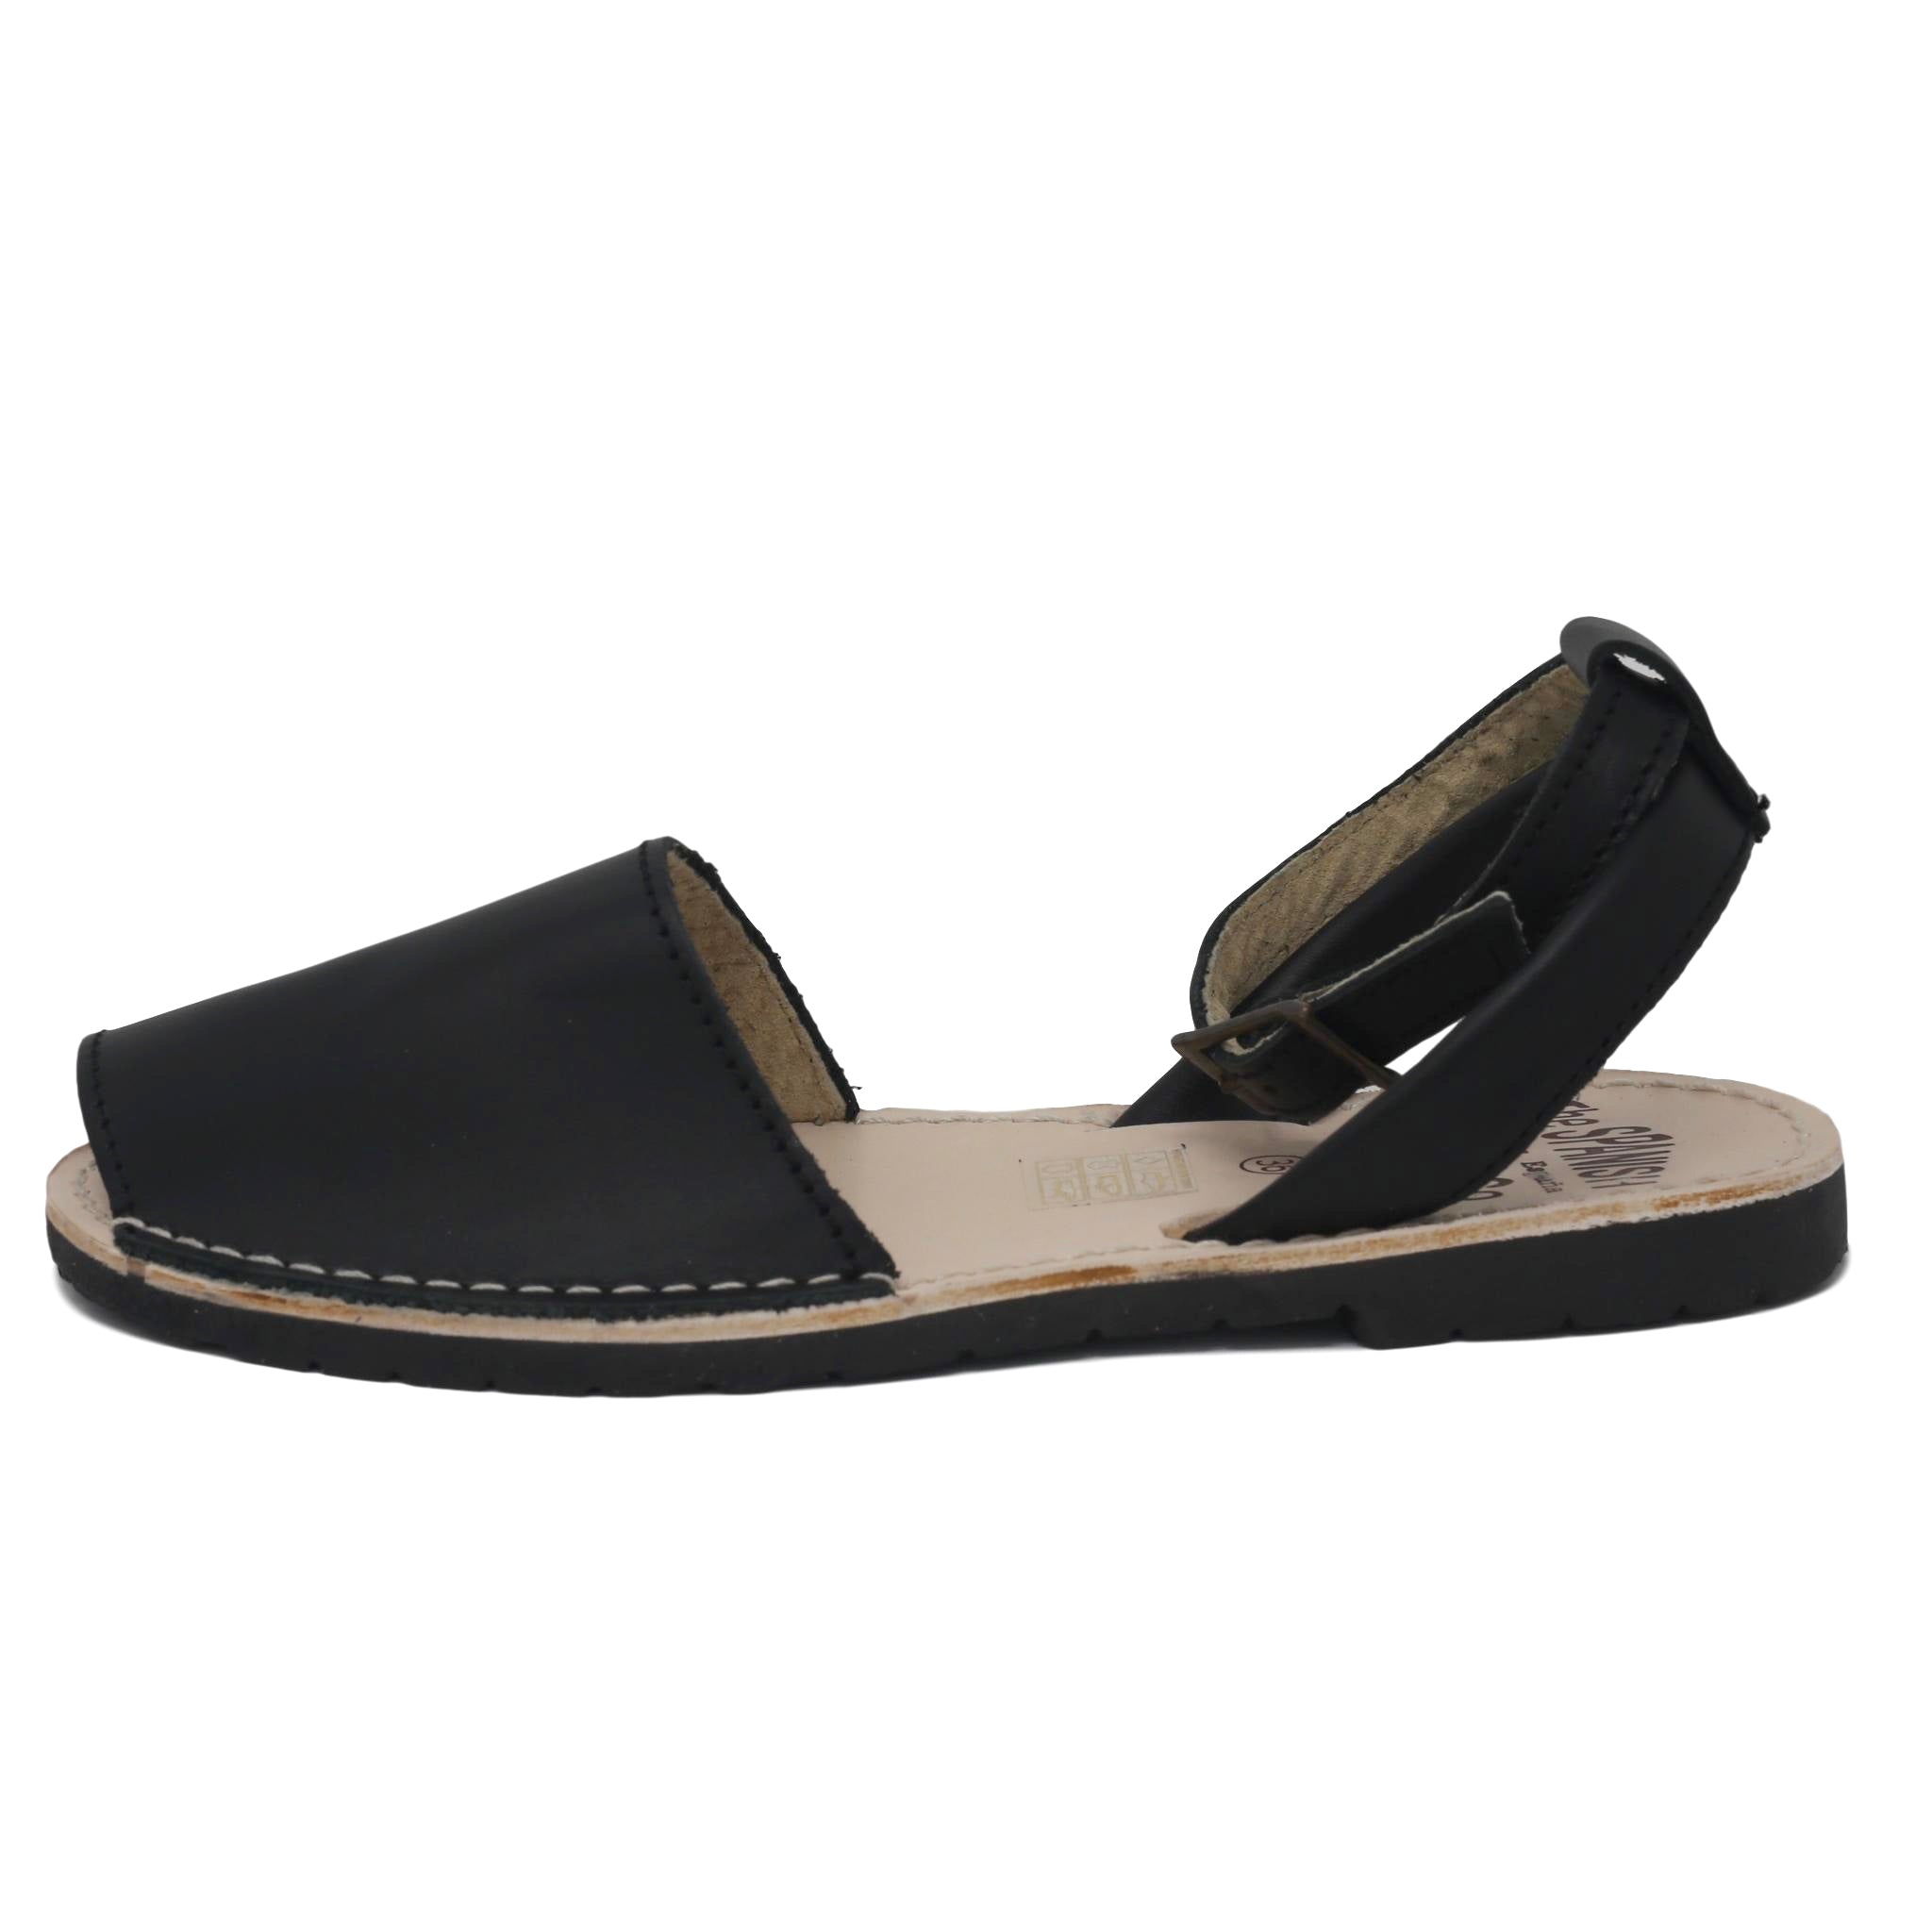 Black sandals with strap -side view